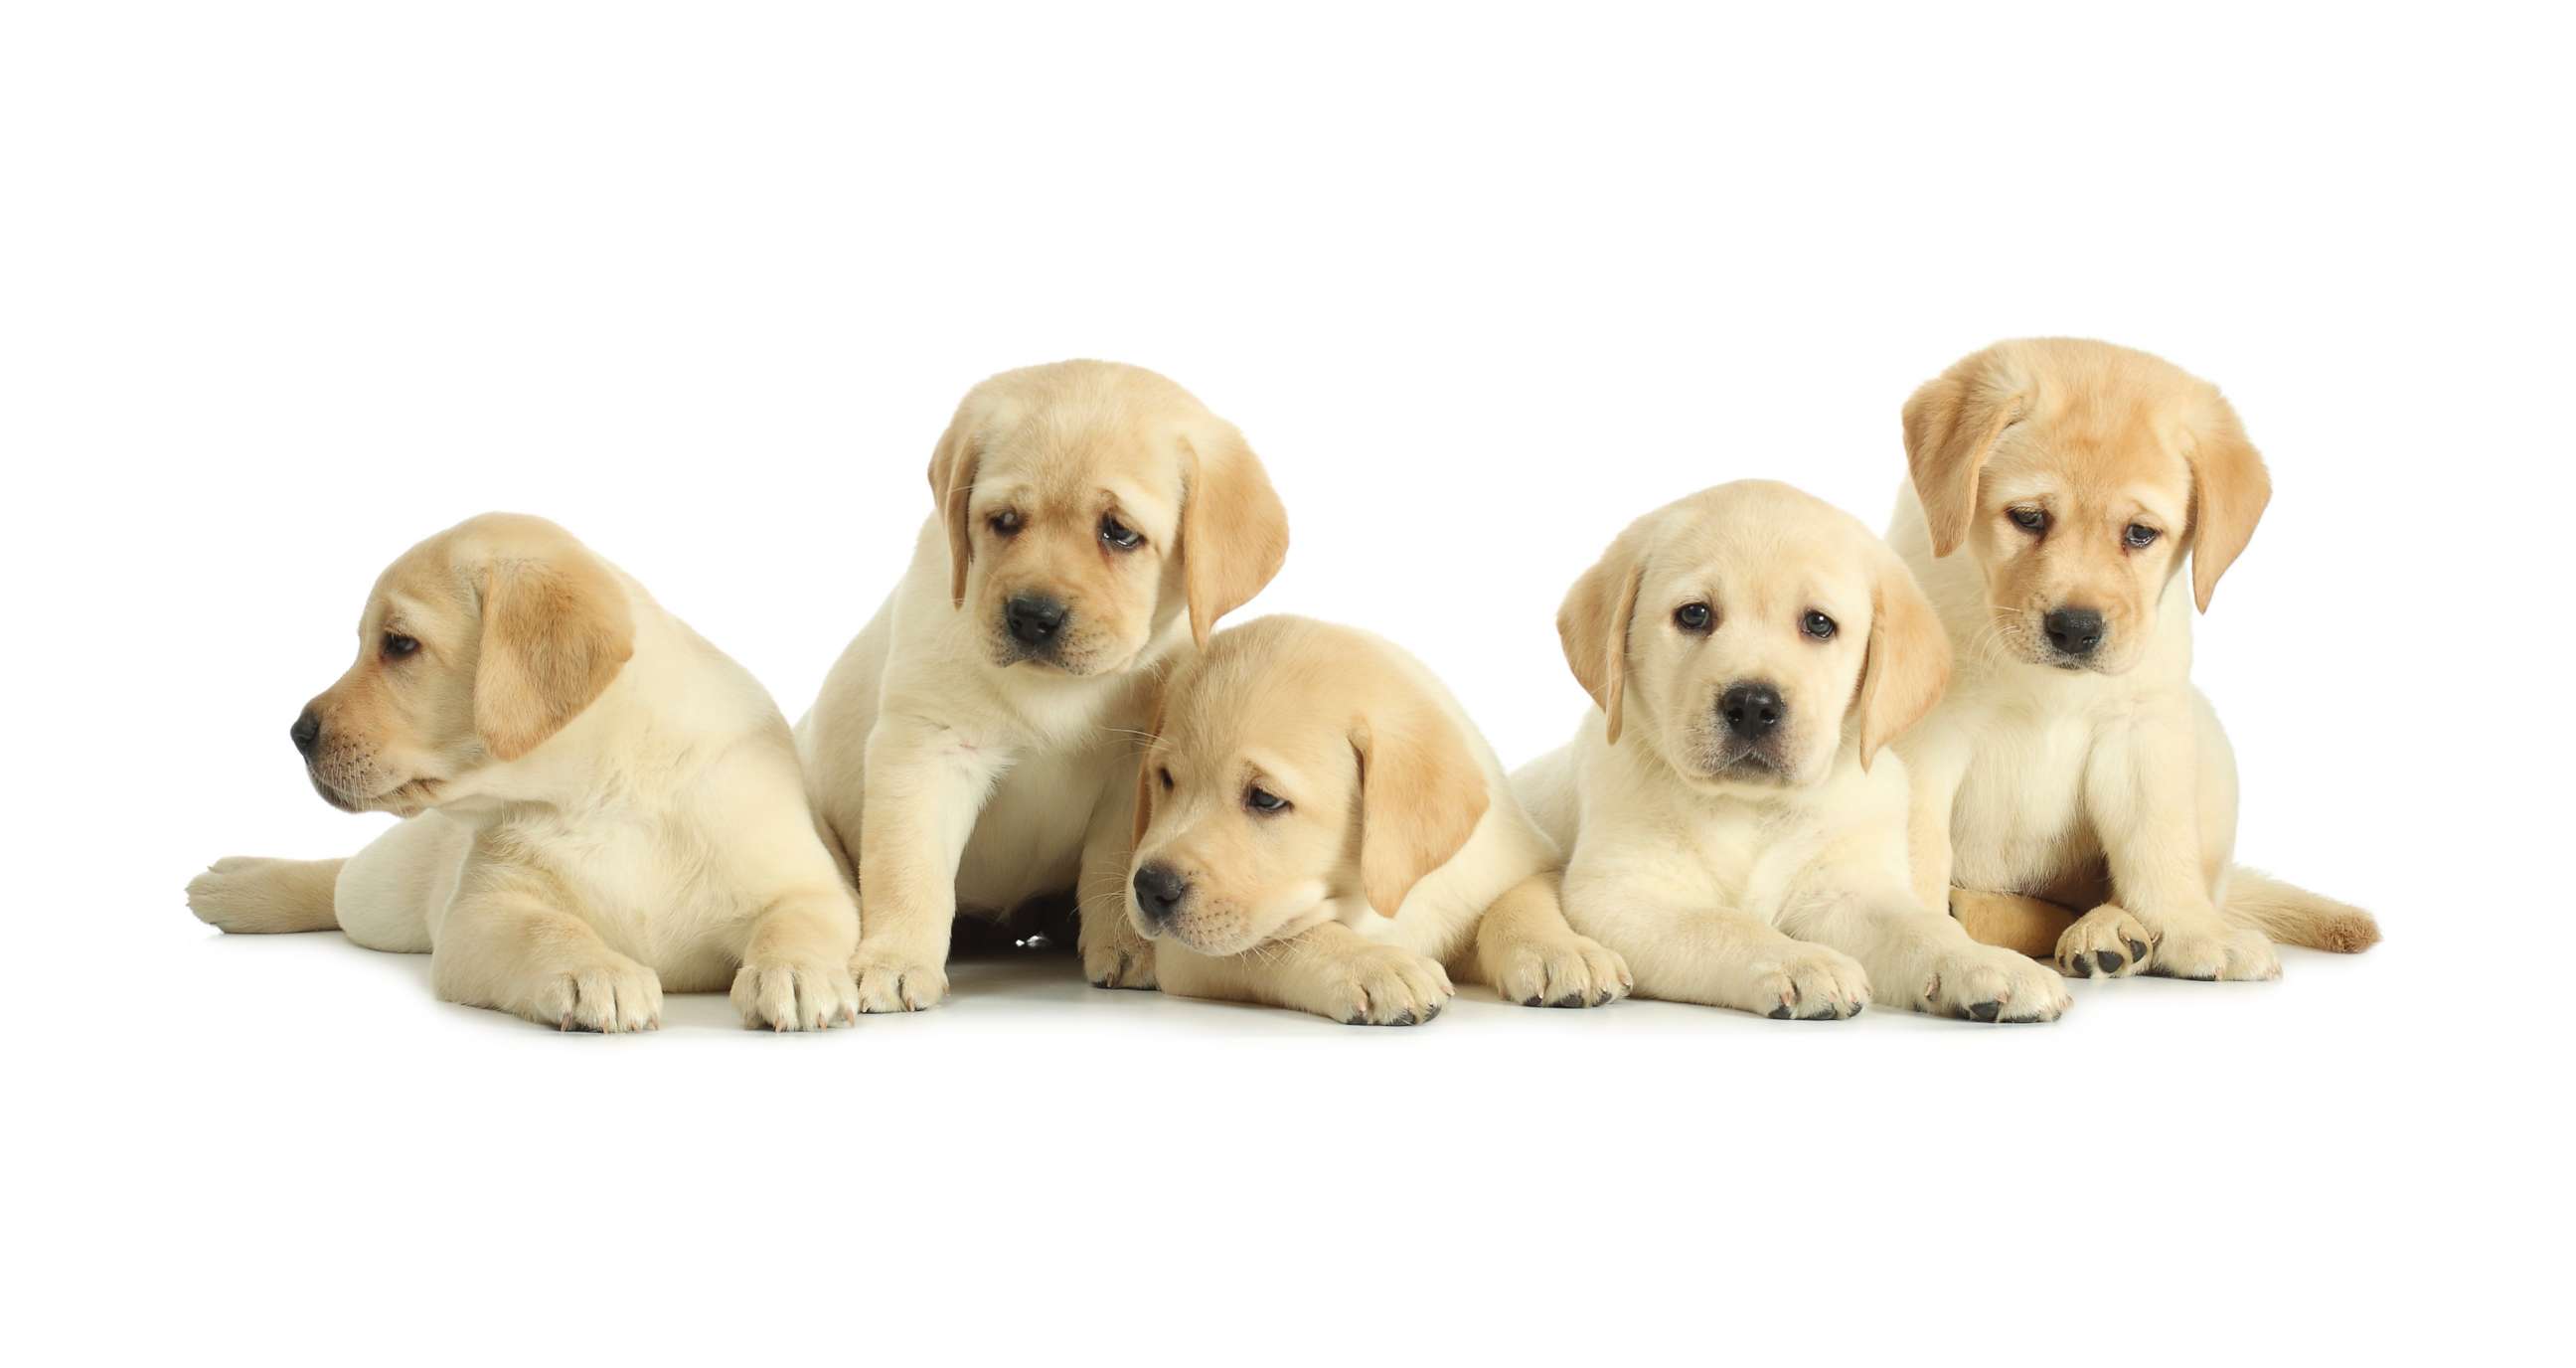 PHOTO: The Centers for Disease Control and Prevention said on Monday it is investigating an outbreak of campylobacter infections linked to contact with puppies sold through a national pet store chain.